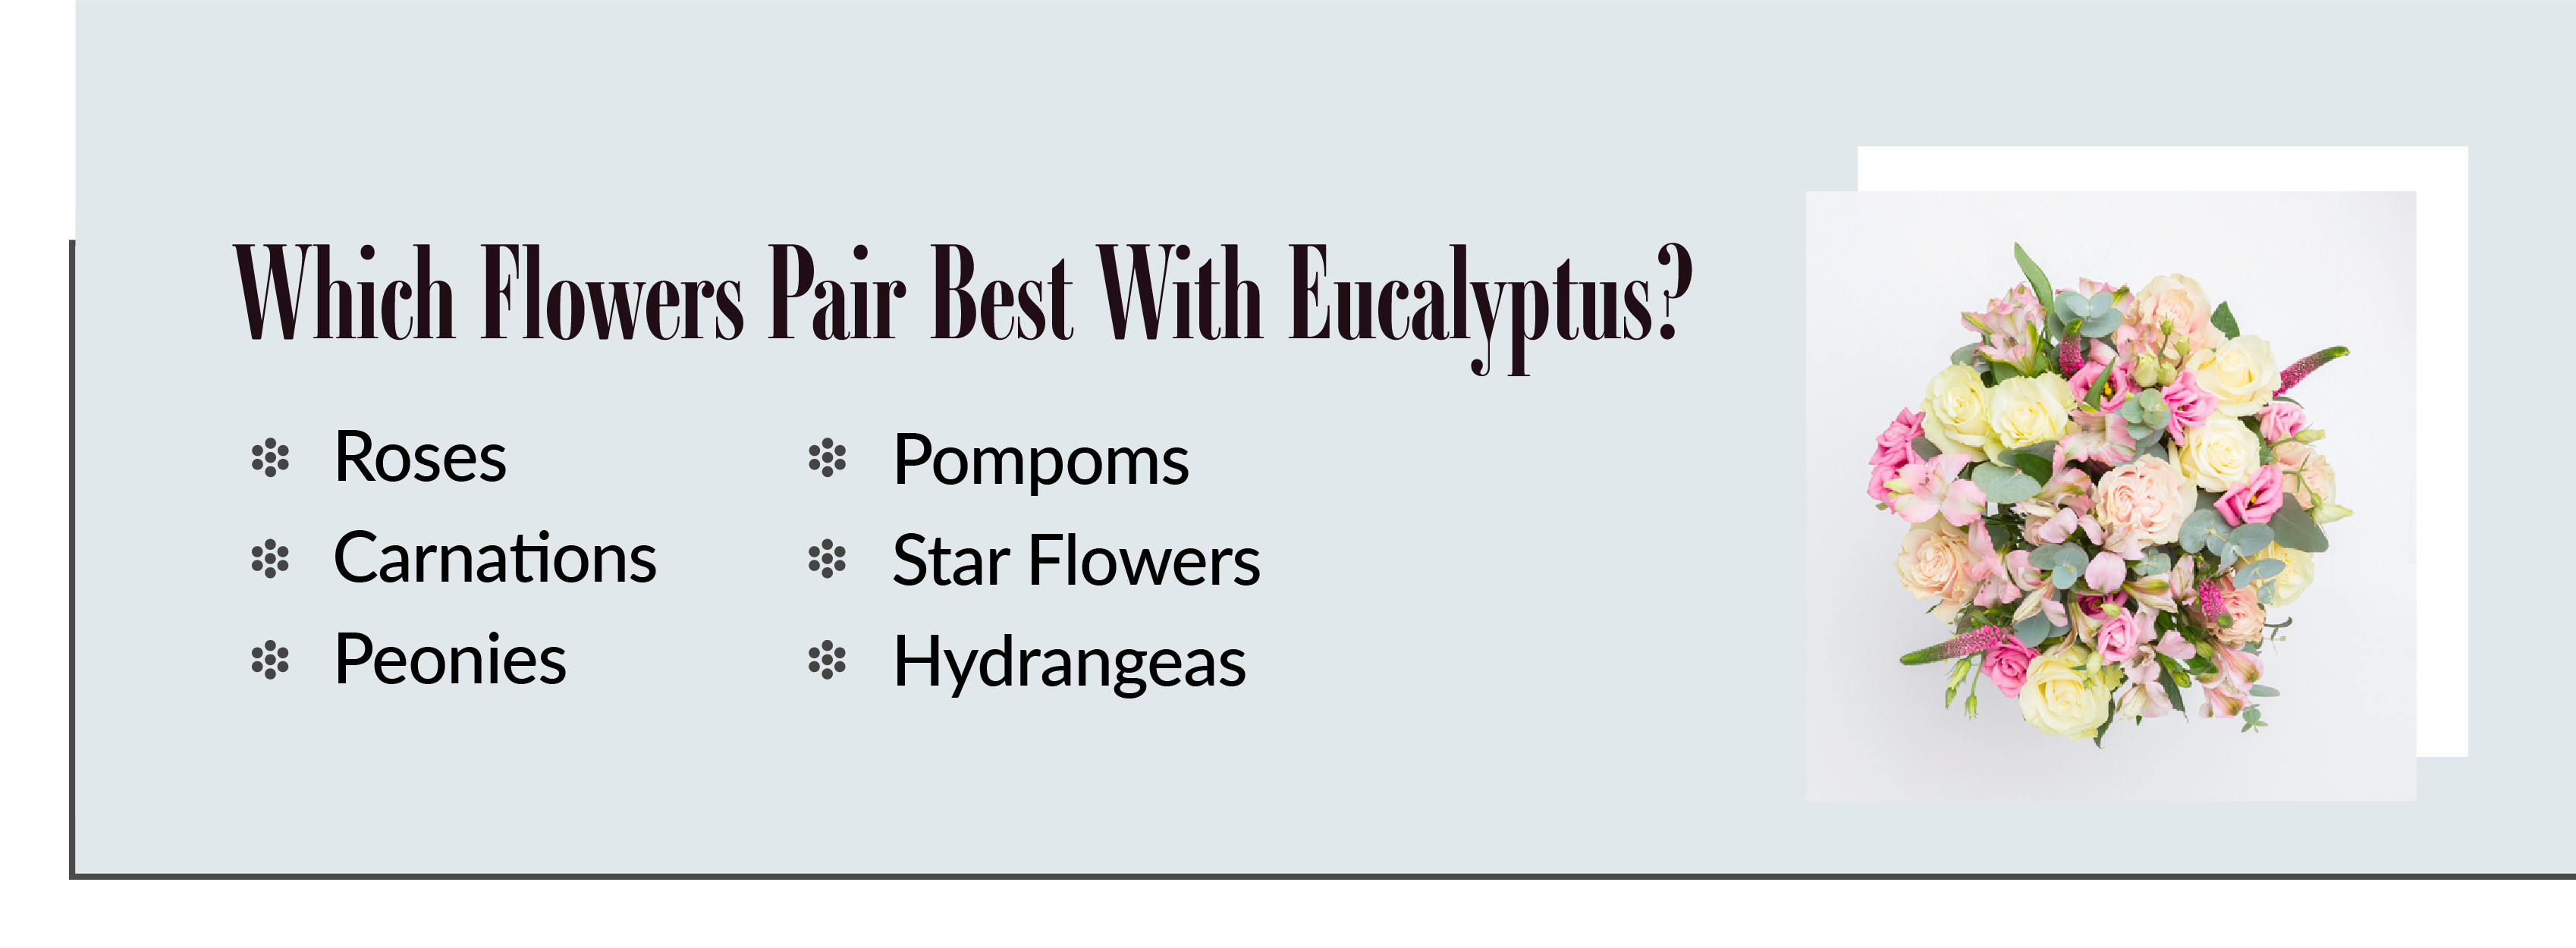 which flowers pair best with eucalyptus